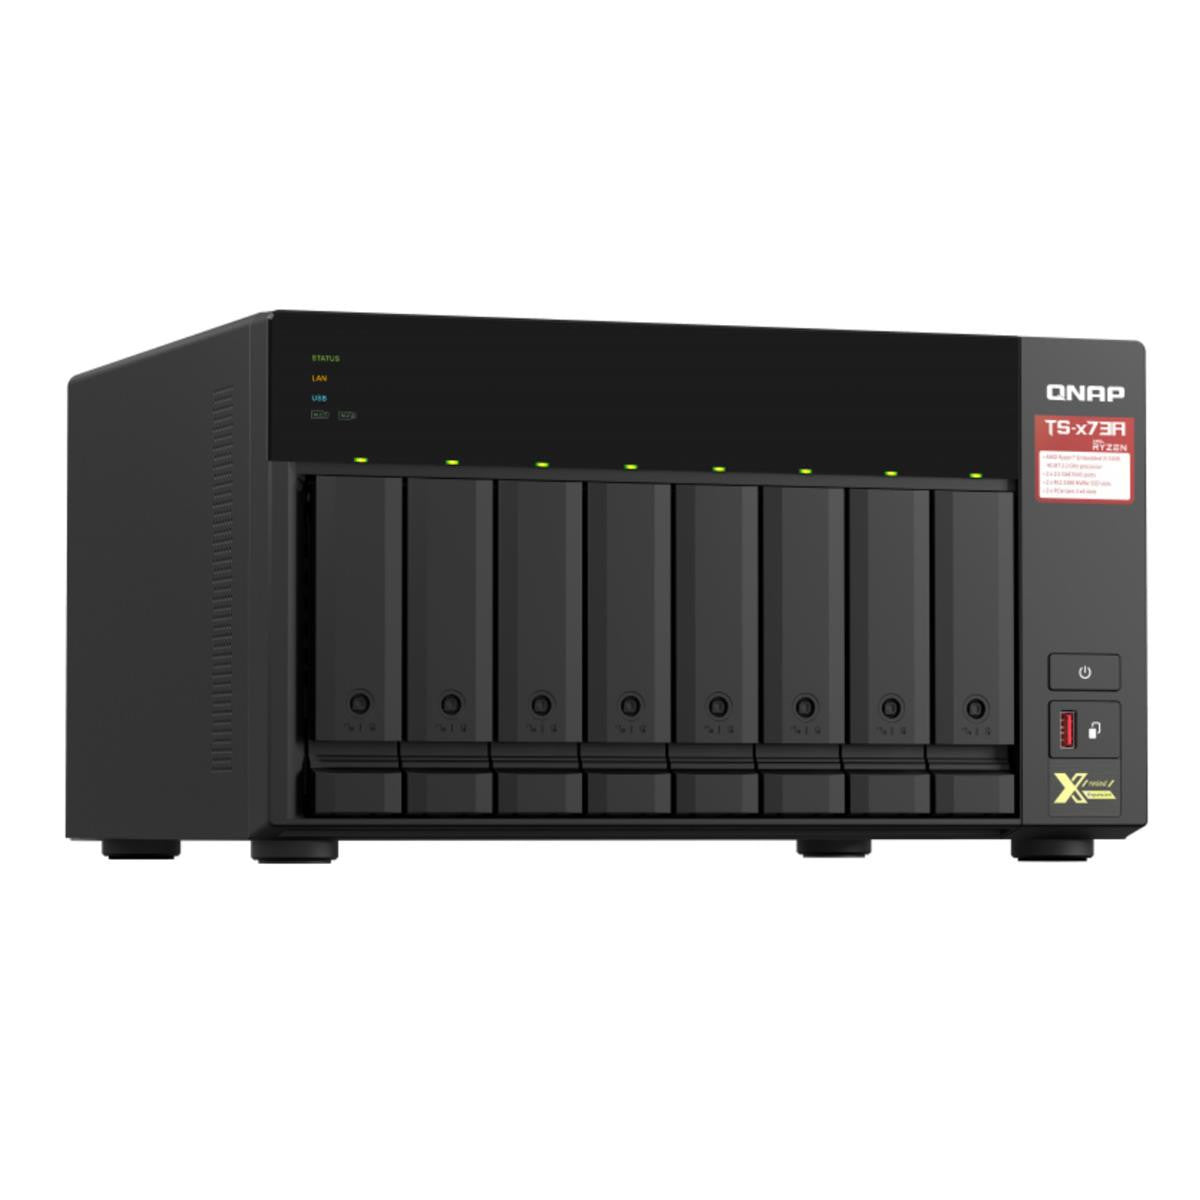 QNAP TS-873A 8-BAY NAS with 32GB DDR4 RAM and 24TB (8x3TB) Western Digital RED PLUS Drives Fully Assembled and Tested